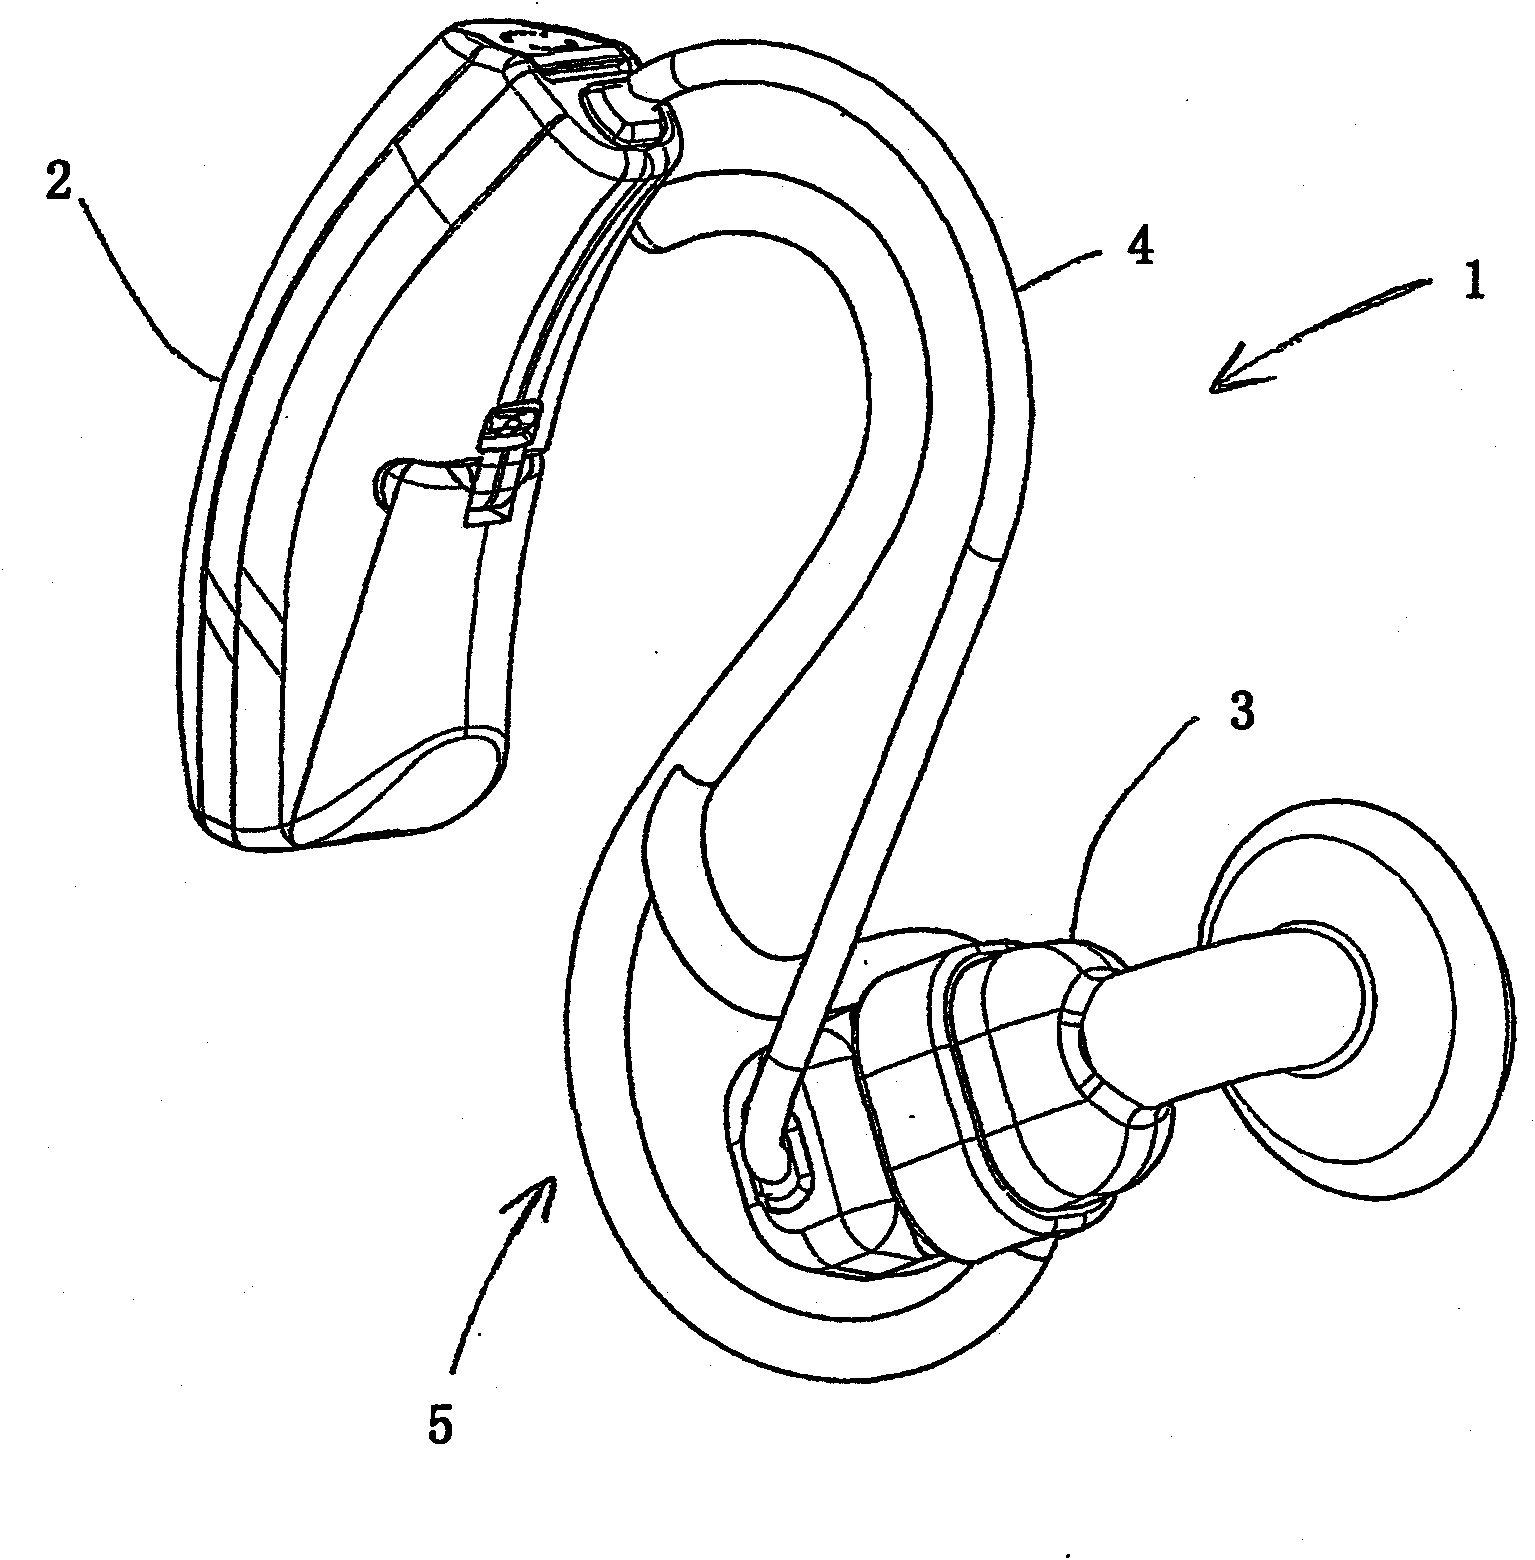 A retaining module for the earpiece of a hearing aid